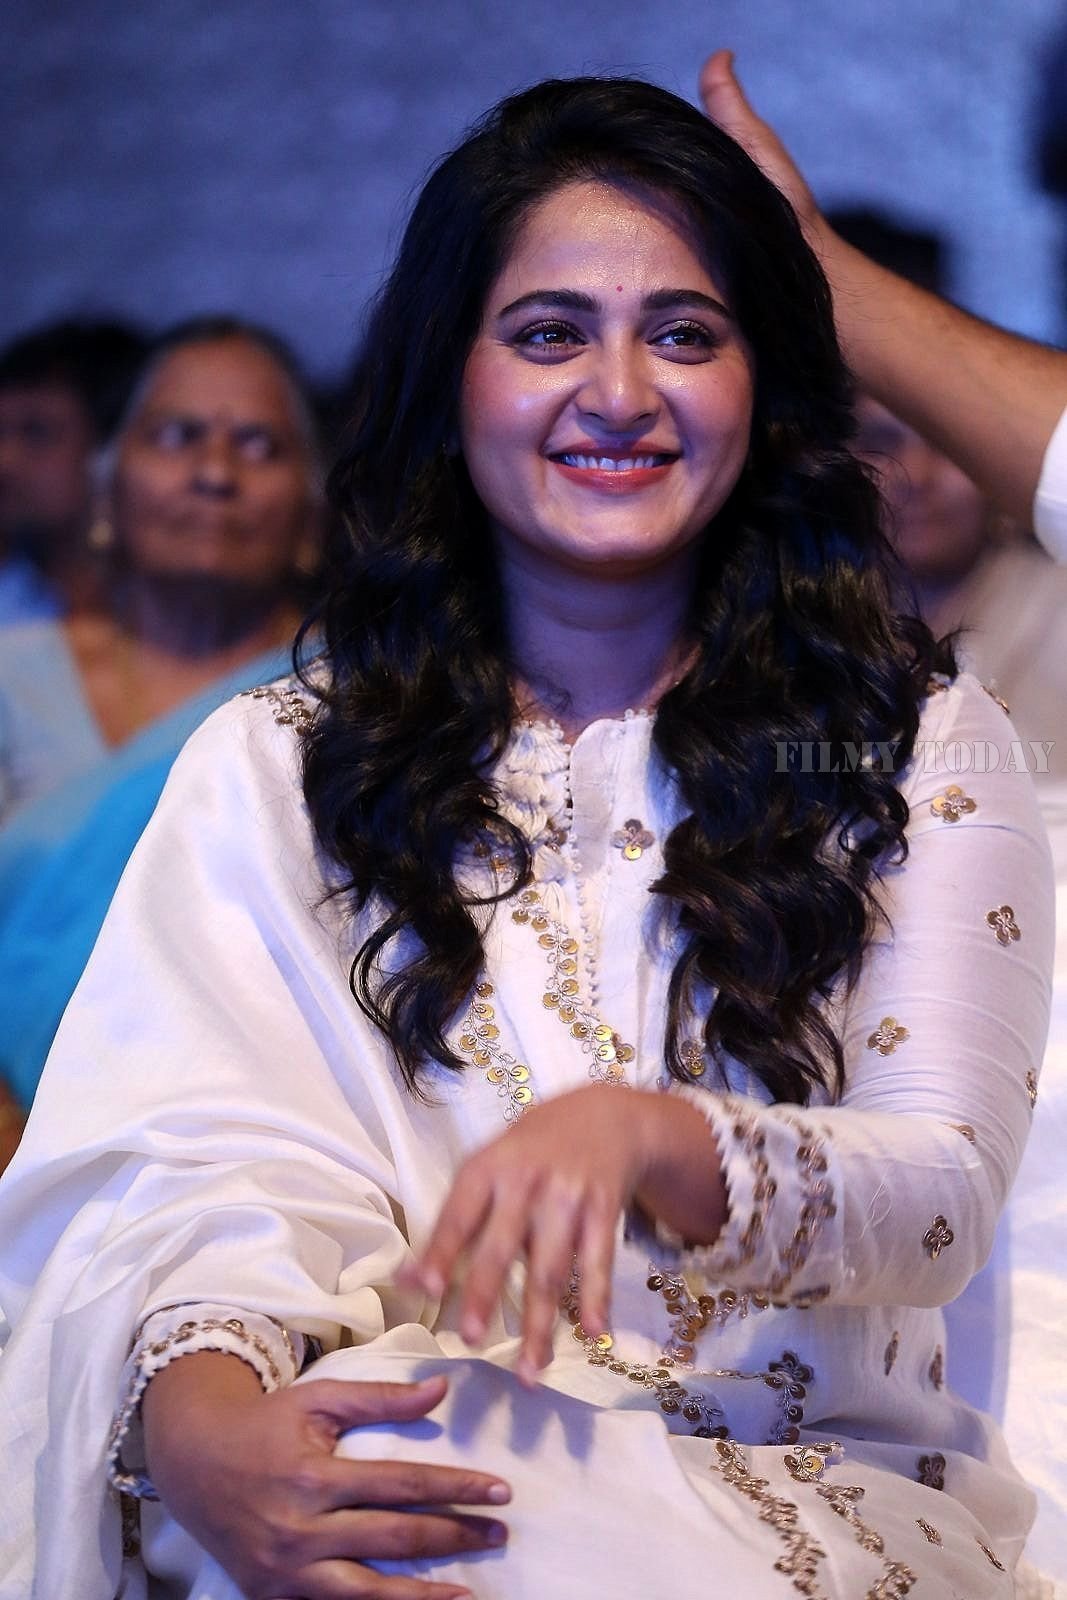 Anushka Shetty - Bhaagamathie Pre Release Event Photos | Picture 1560467